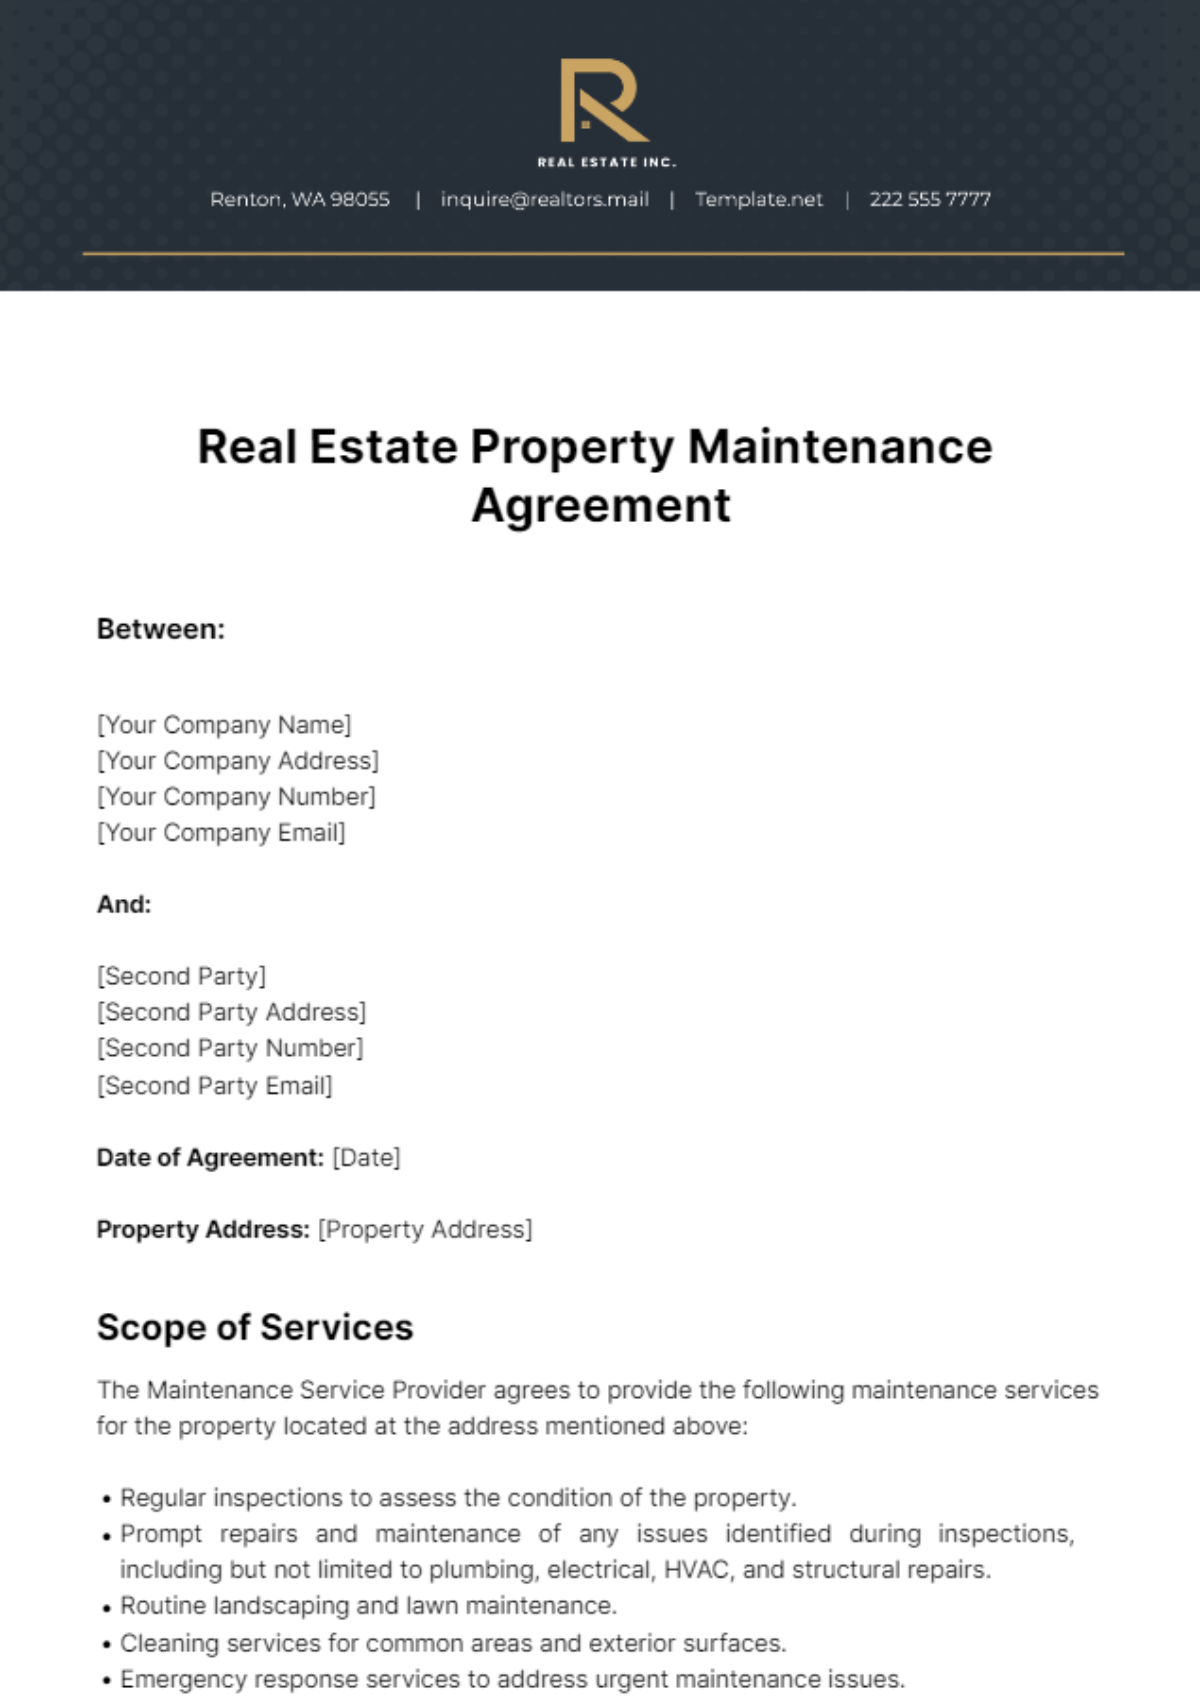 Real Estate Property Maintenance Agreement Template